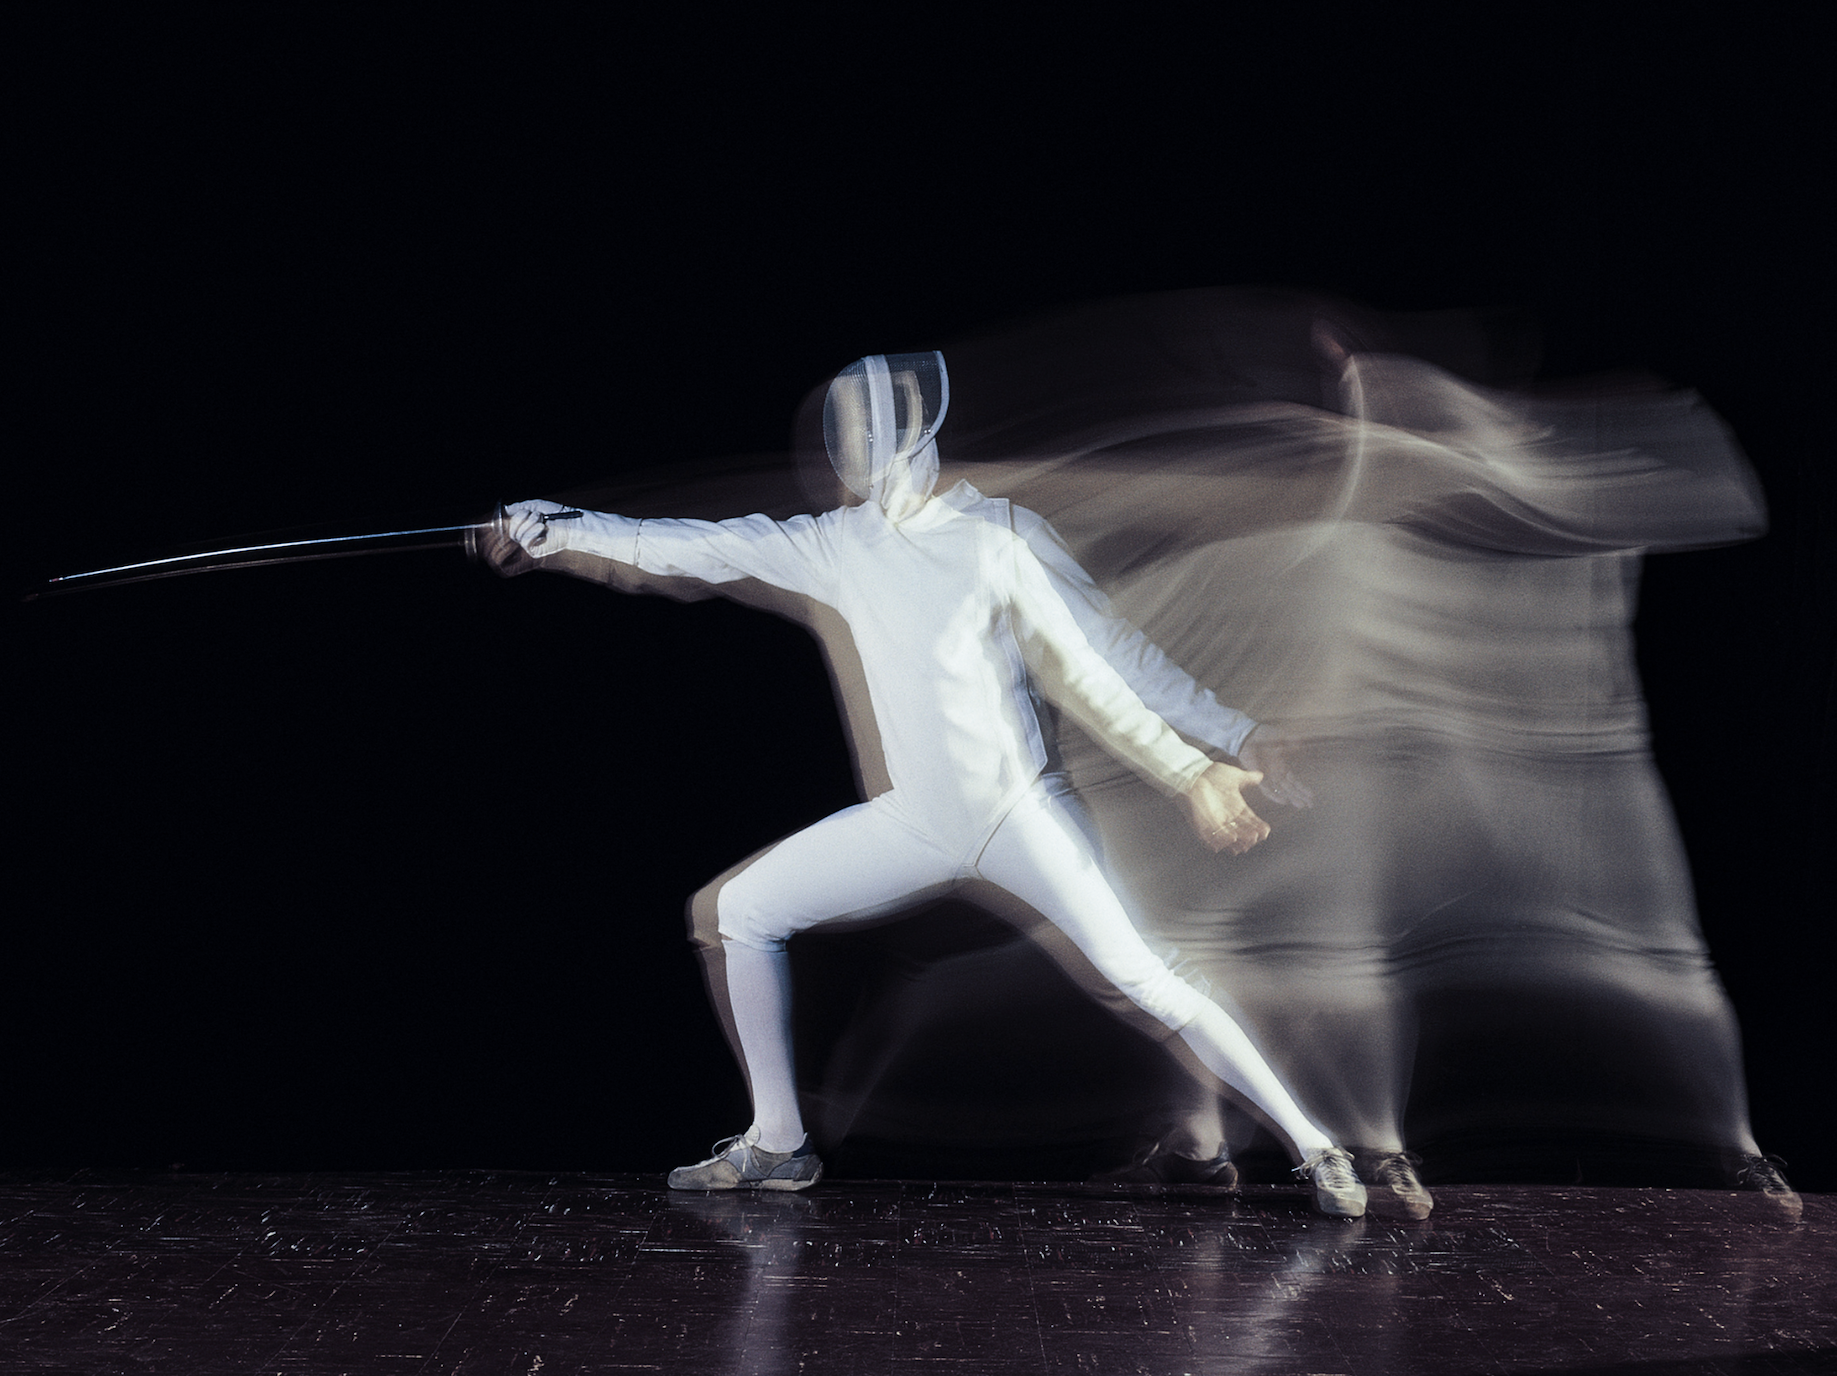 A person dressed in full fencing gear lunges forward 